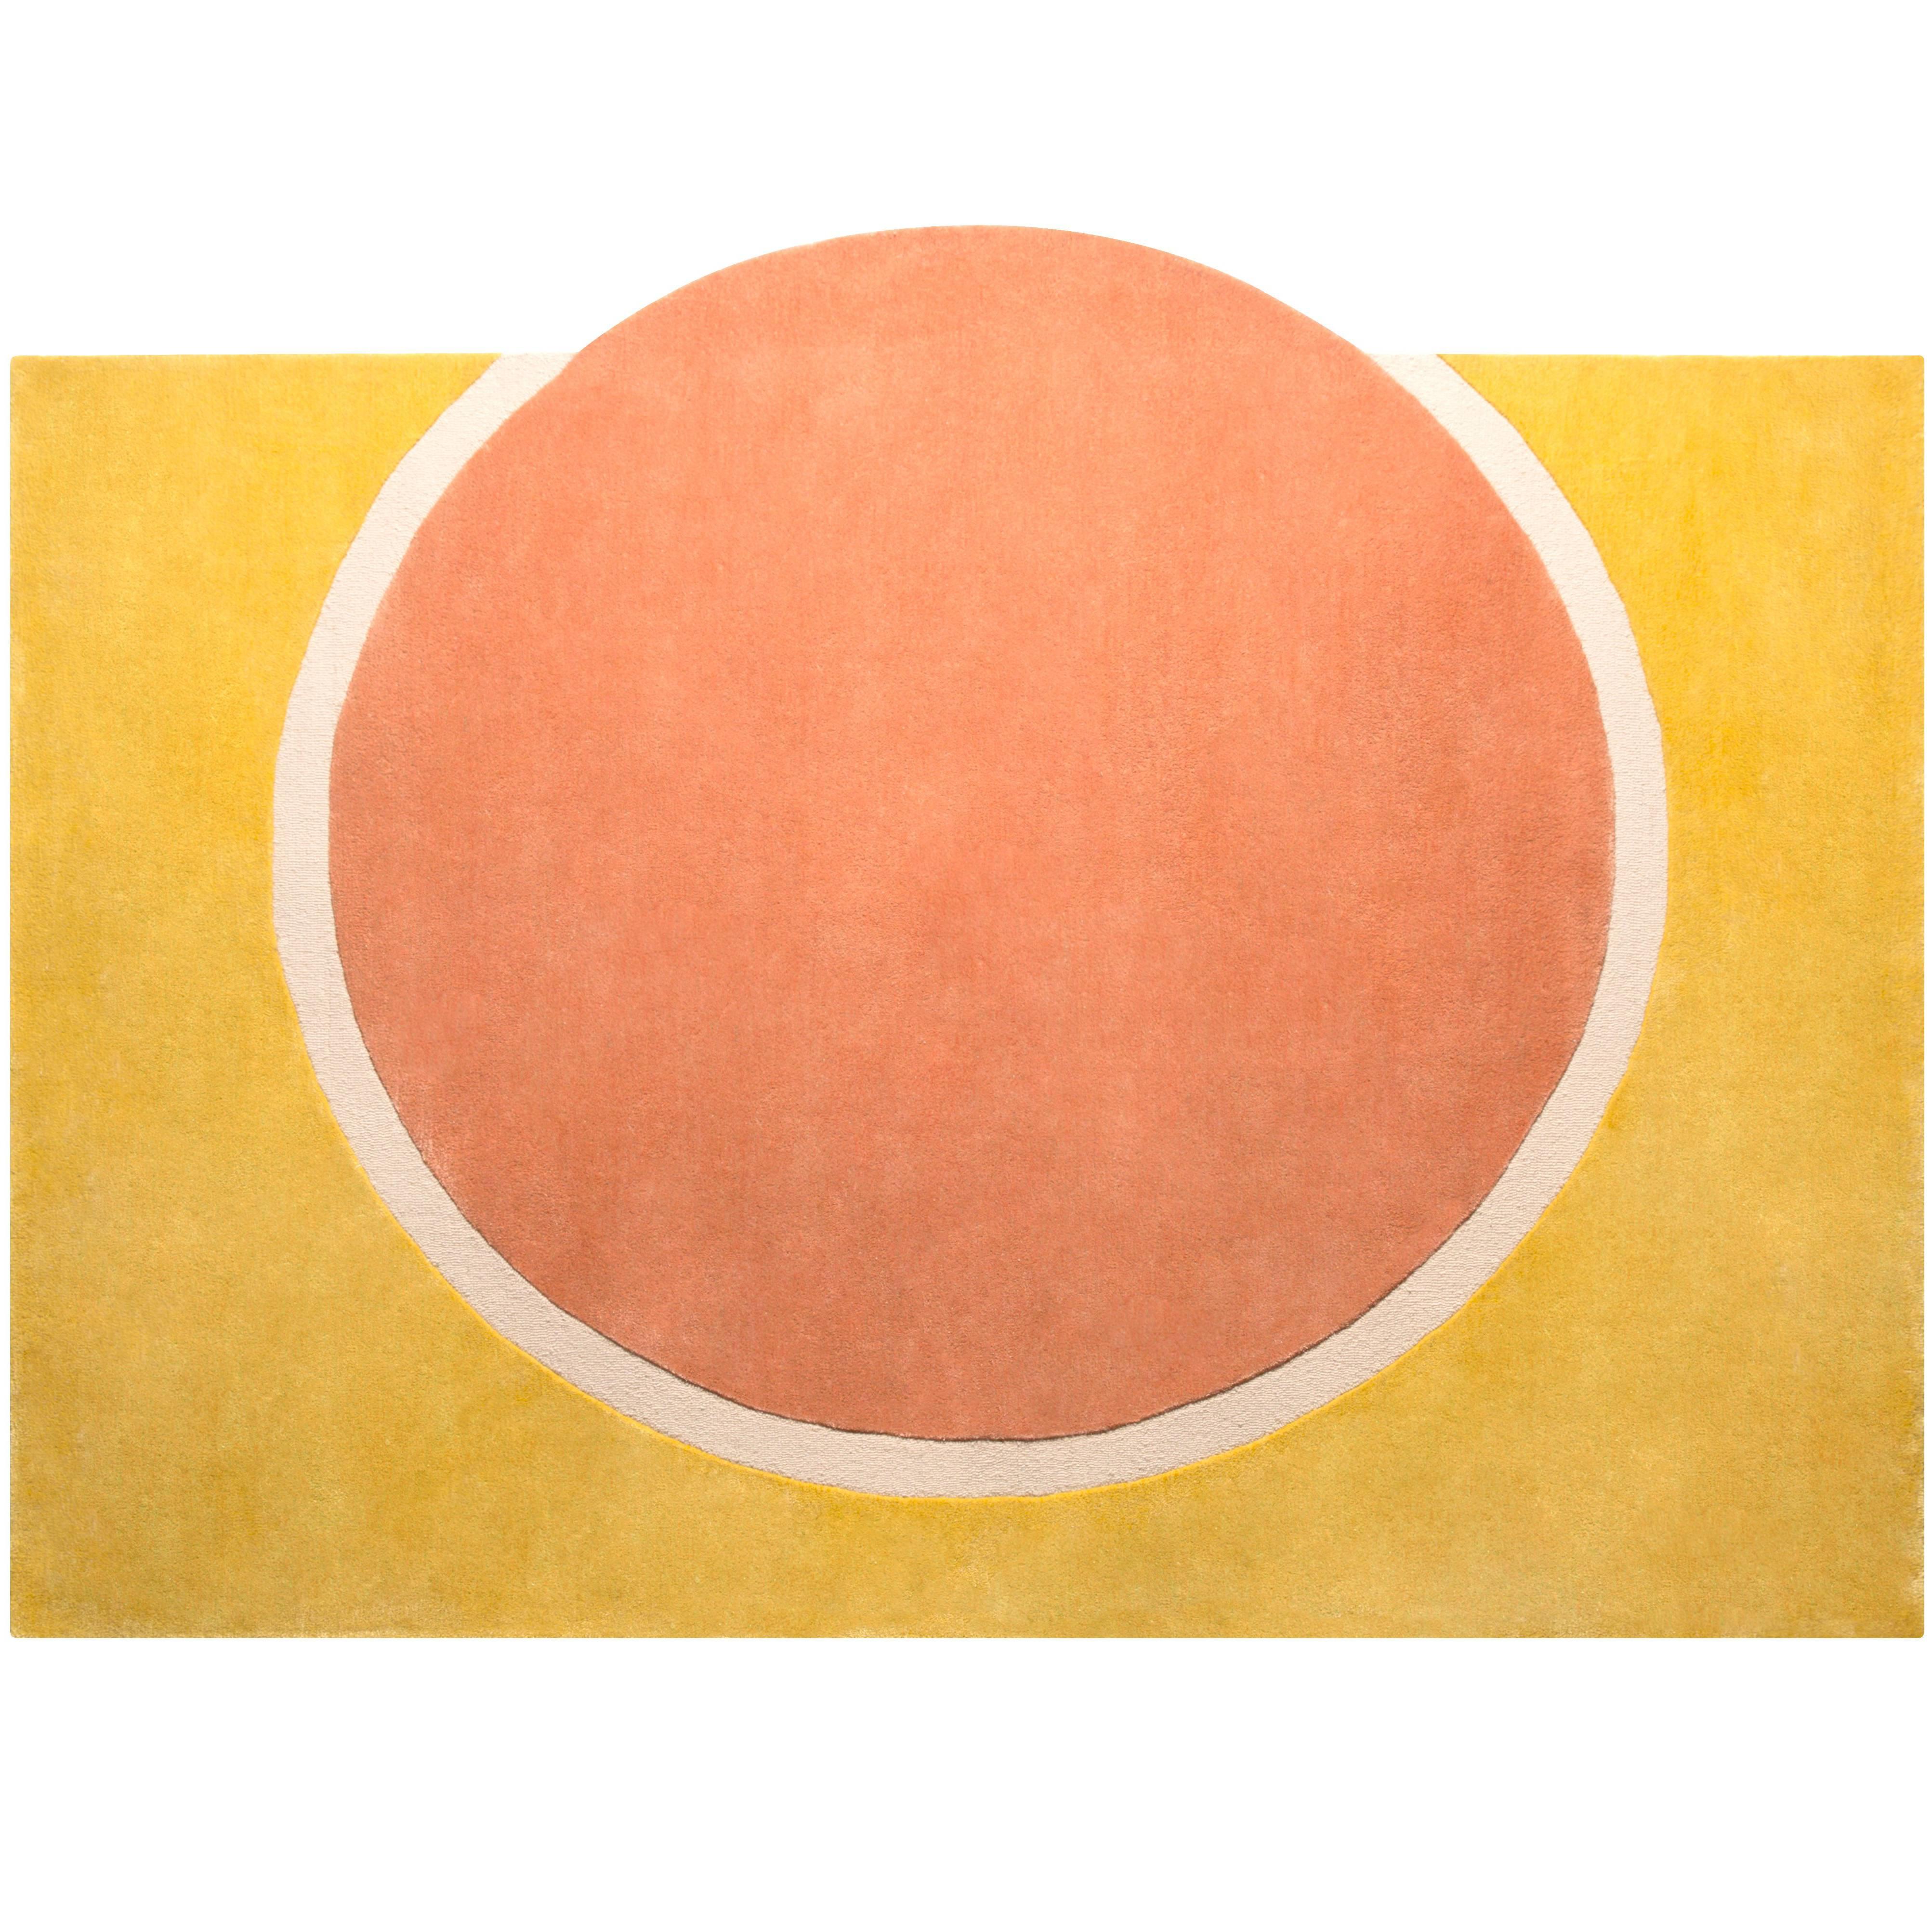  Sunset Rug by Pieces, Modern Round Hand Tufted Colorful Coral Yellow Rug Carpet For Sale